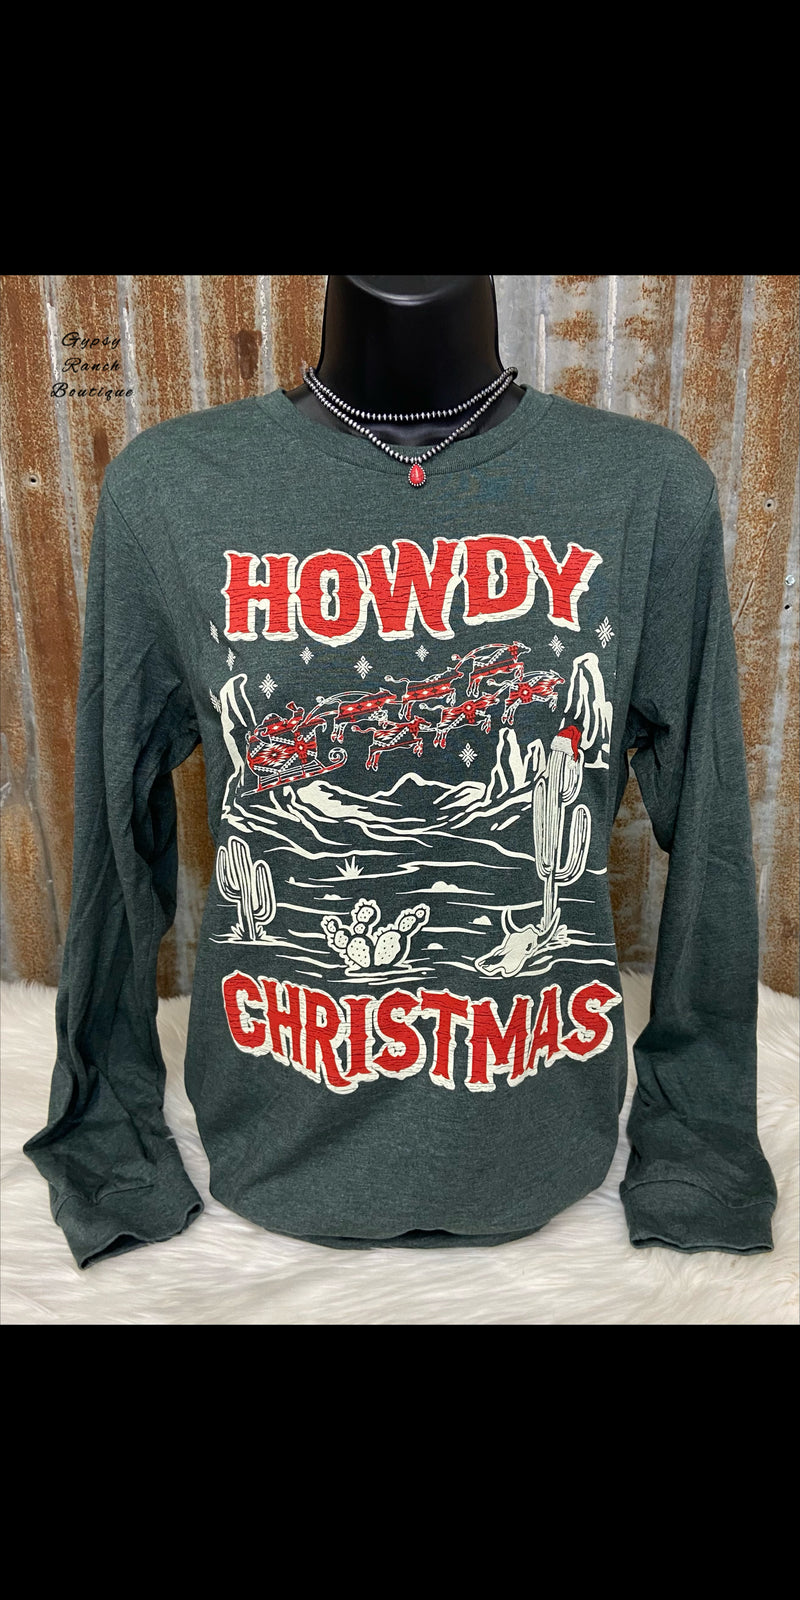 Howdy Christmas Pullover Top - Also in Plus Size